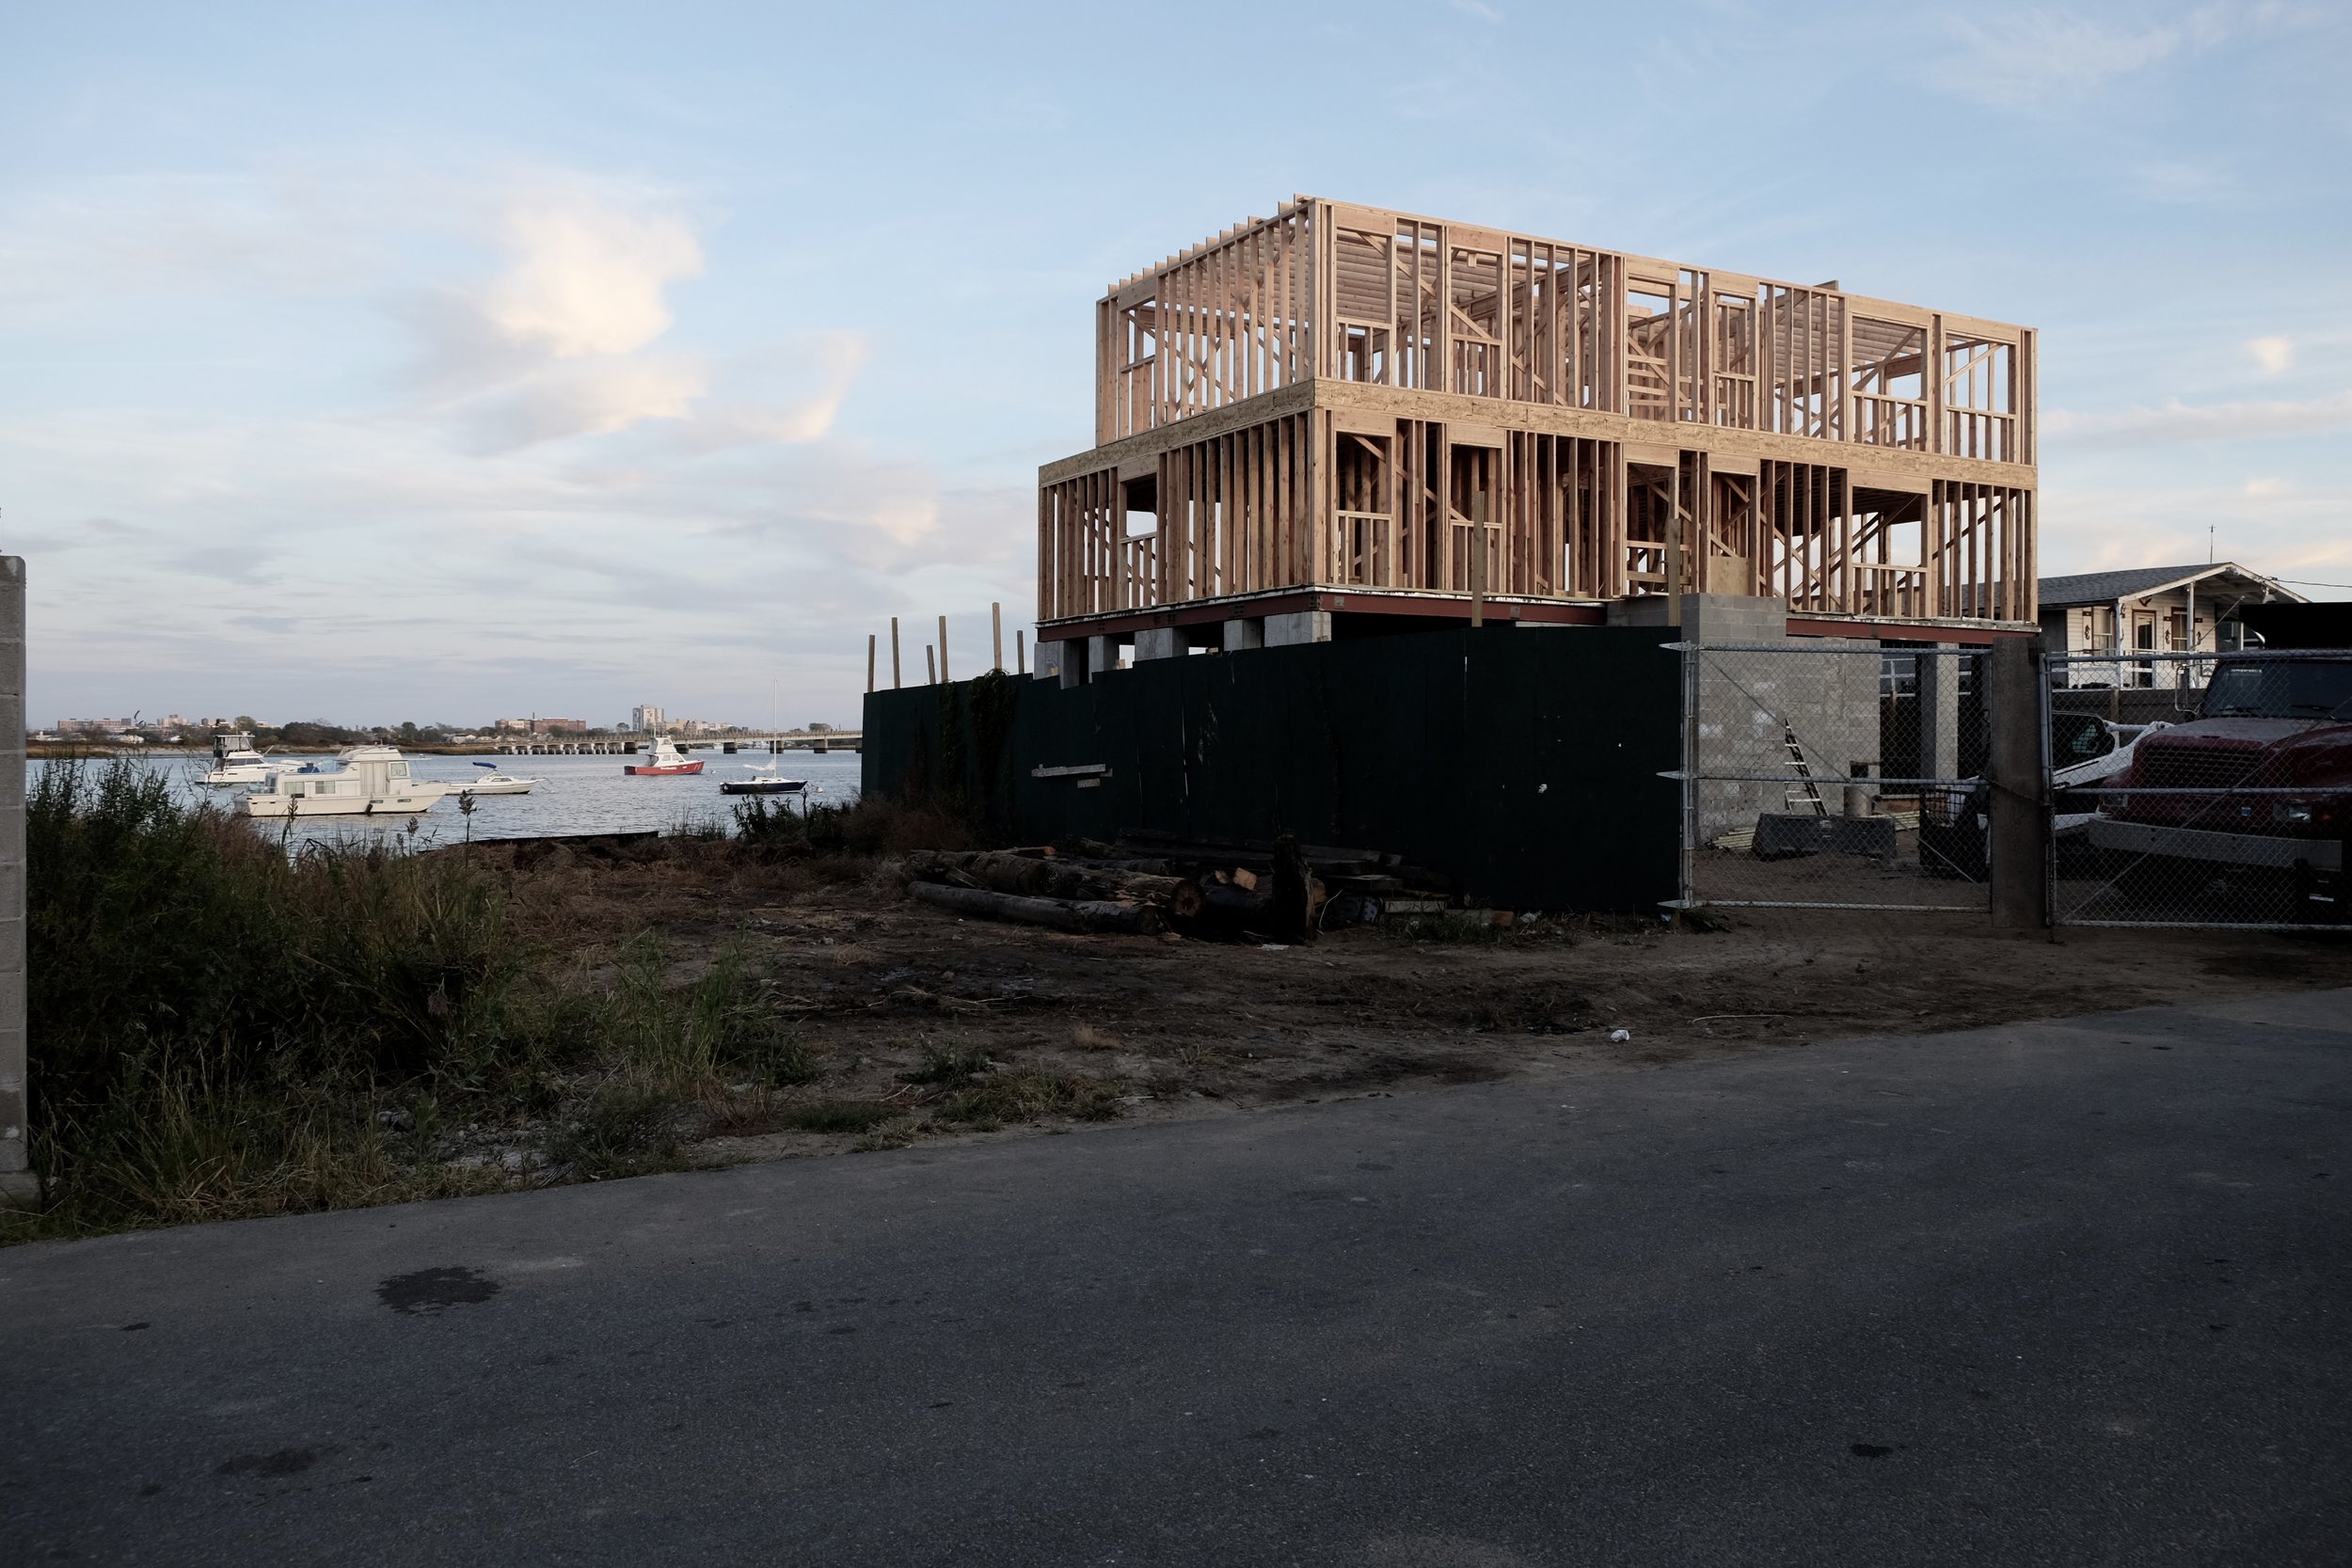 Build it Back - Broad Channel